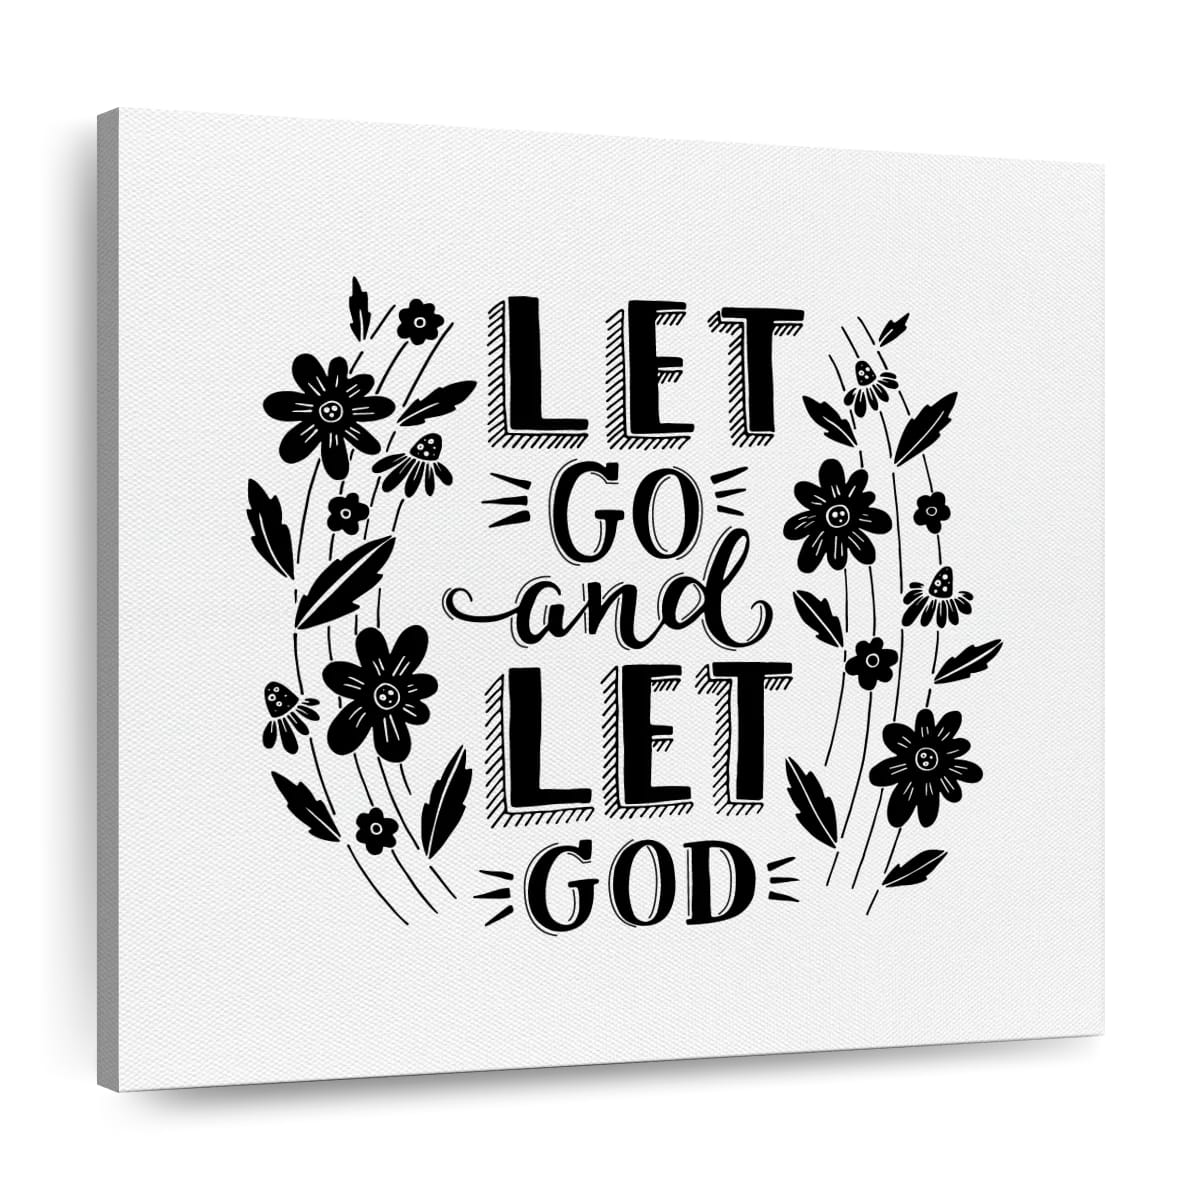 Let Go And Let God Square Canvas Art - Christian Wall Decor - Christian Wall Hanging